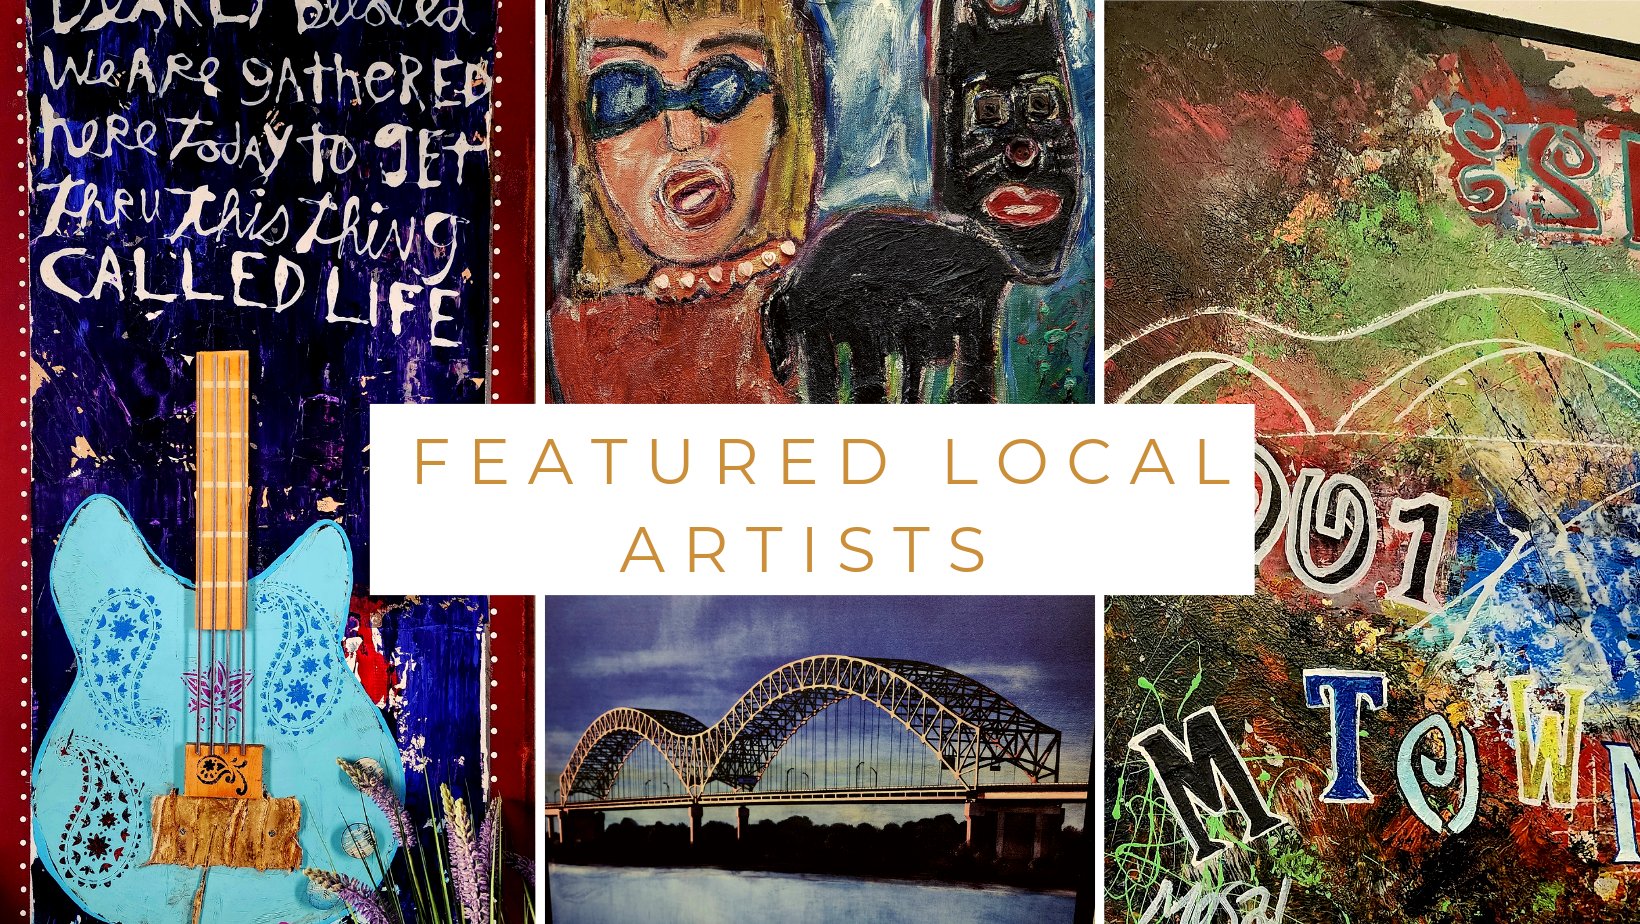 FEATURED LOCAL ARTISTS